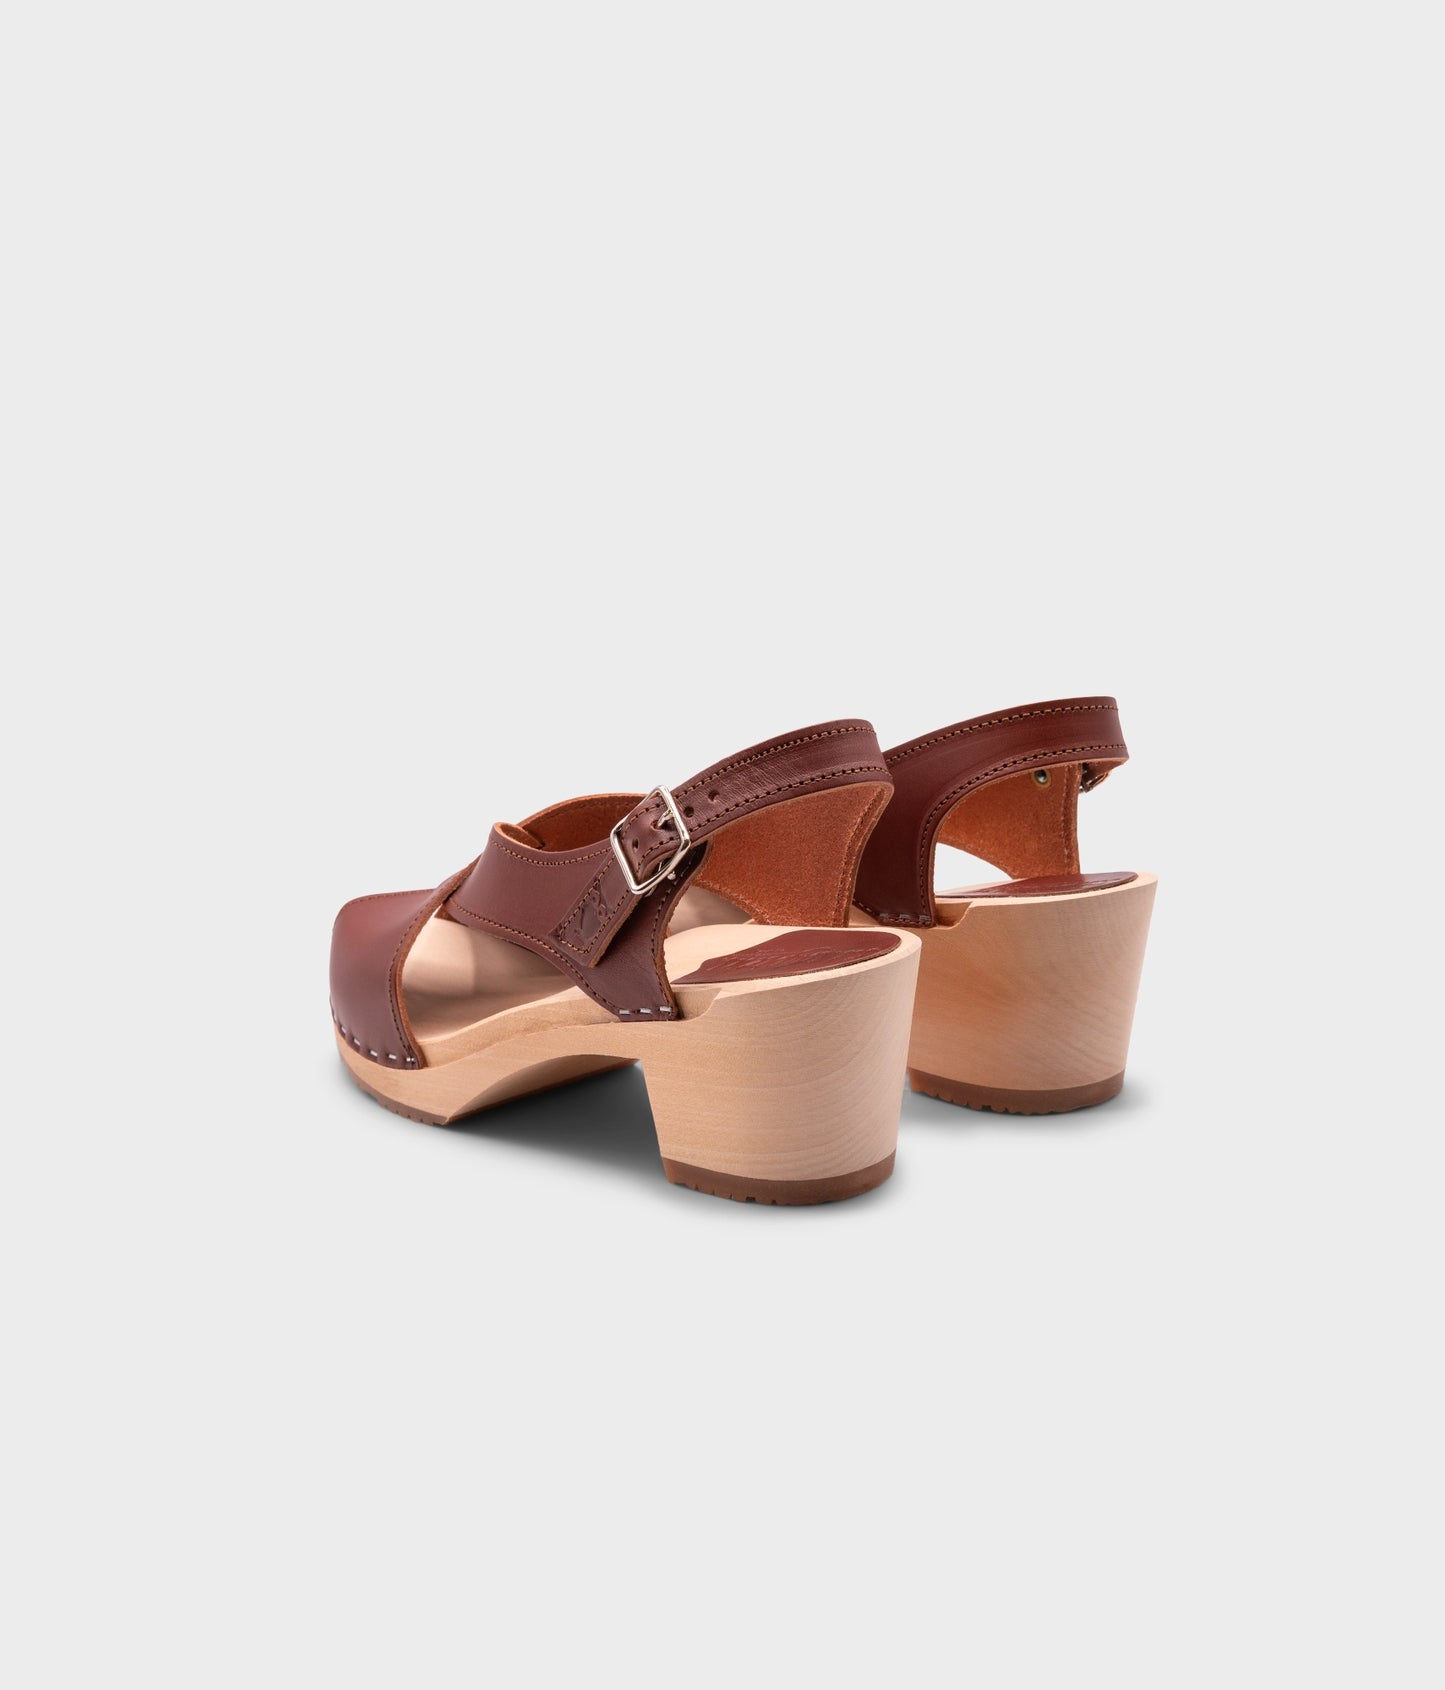 high heeled criss cross clog sandals in cognac red vegetable tanned leather stapled on a light wooden base